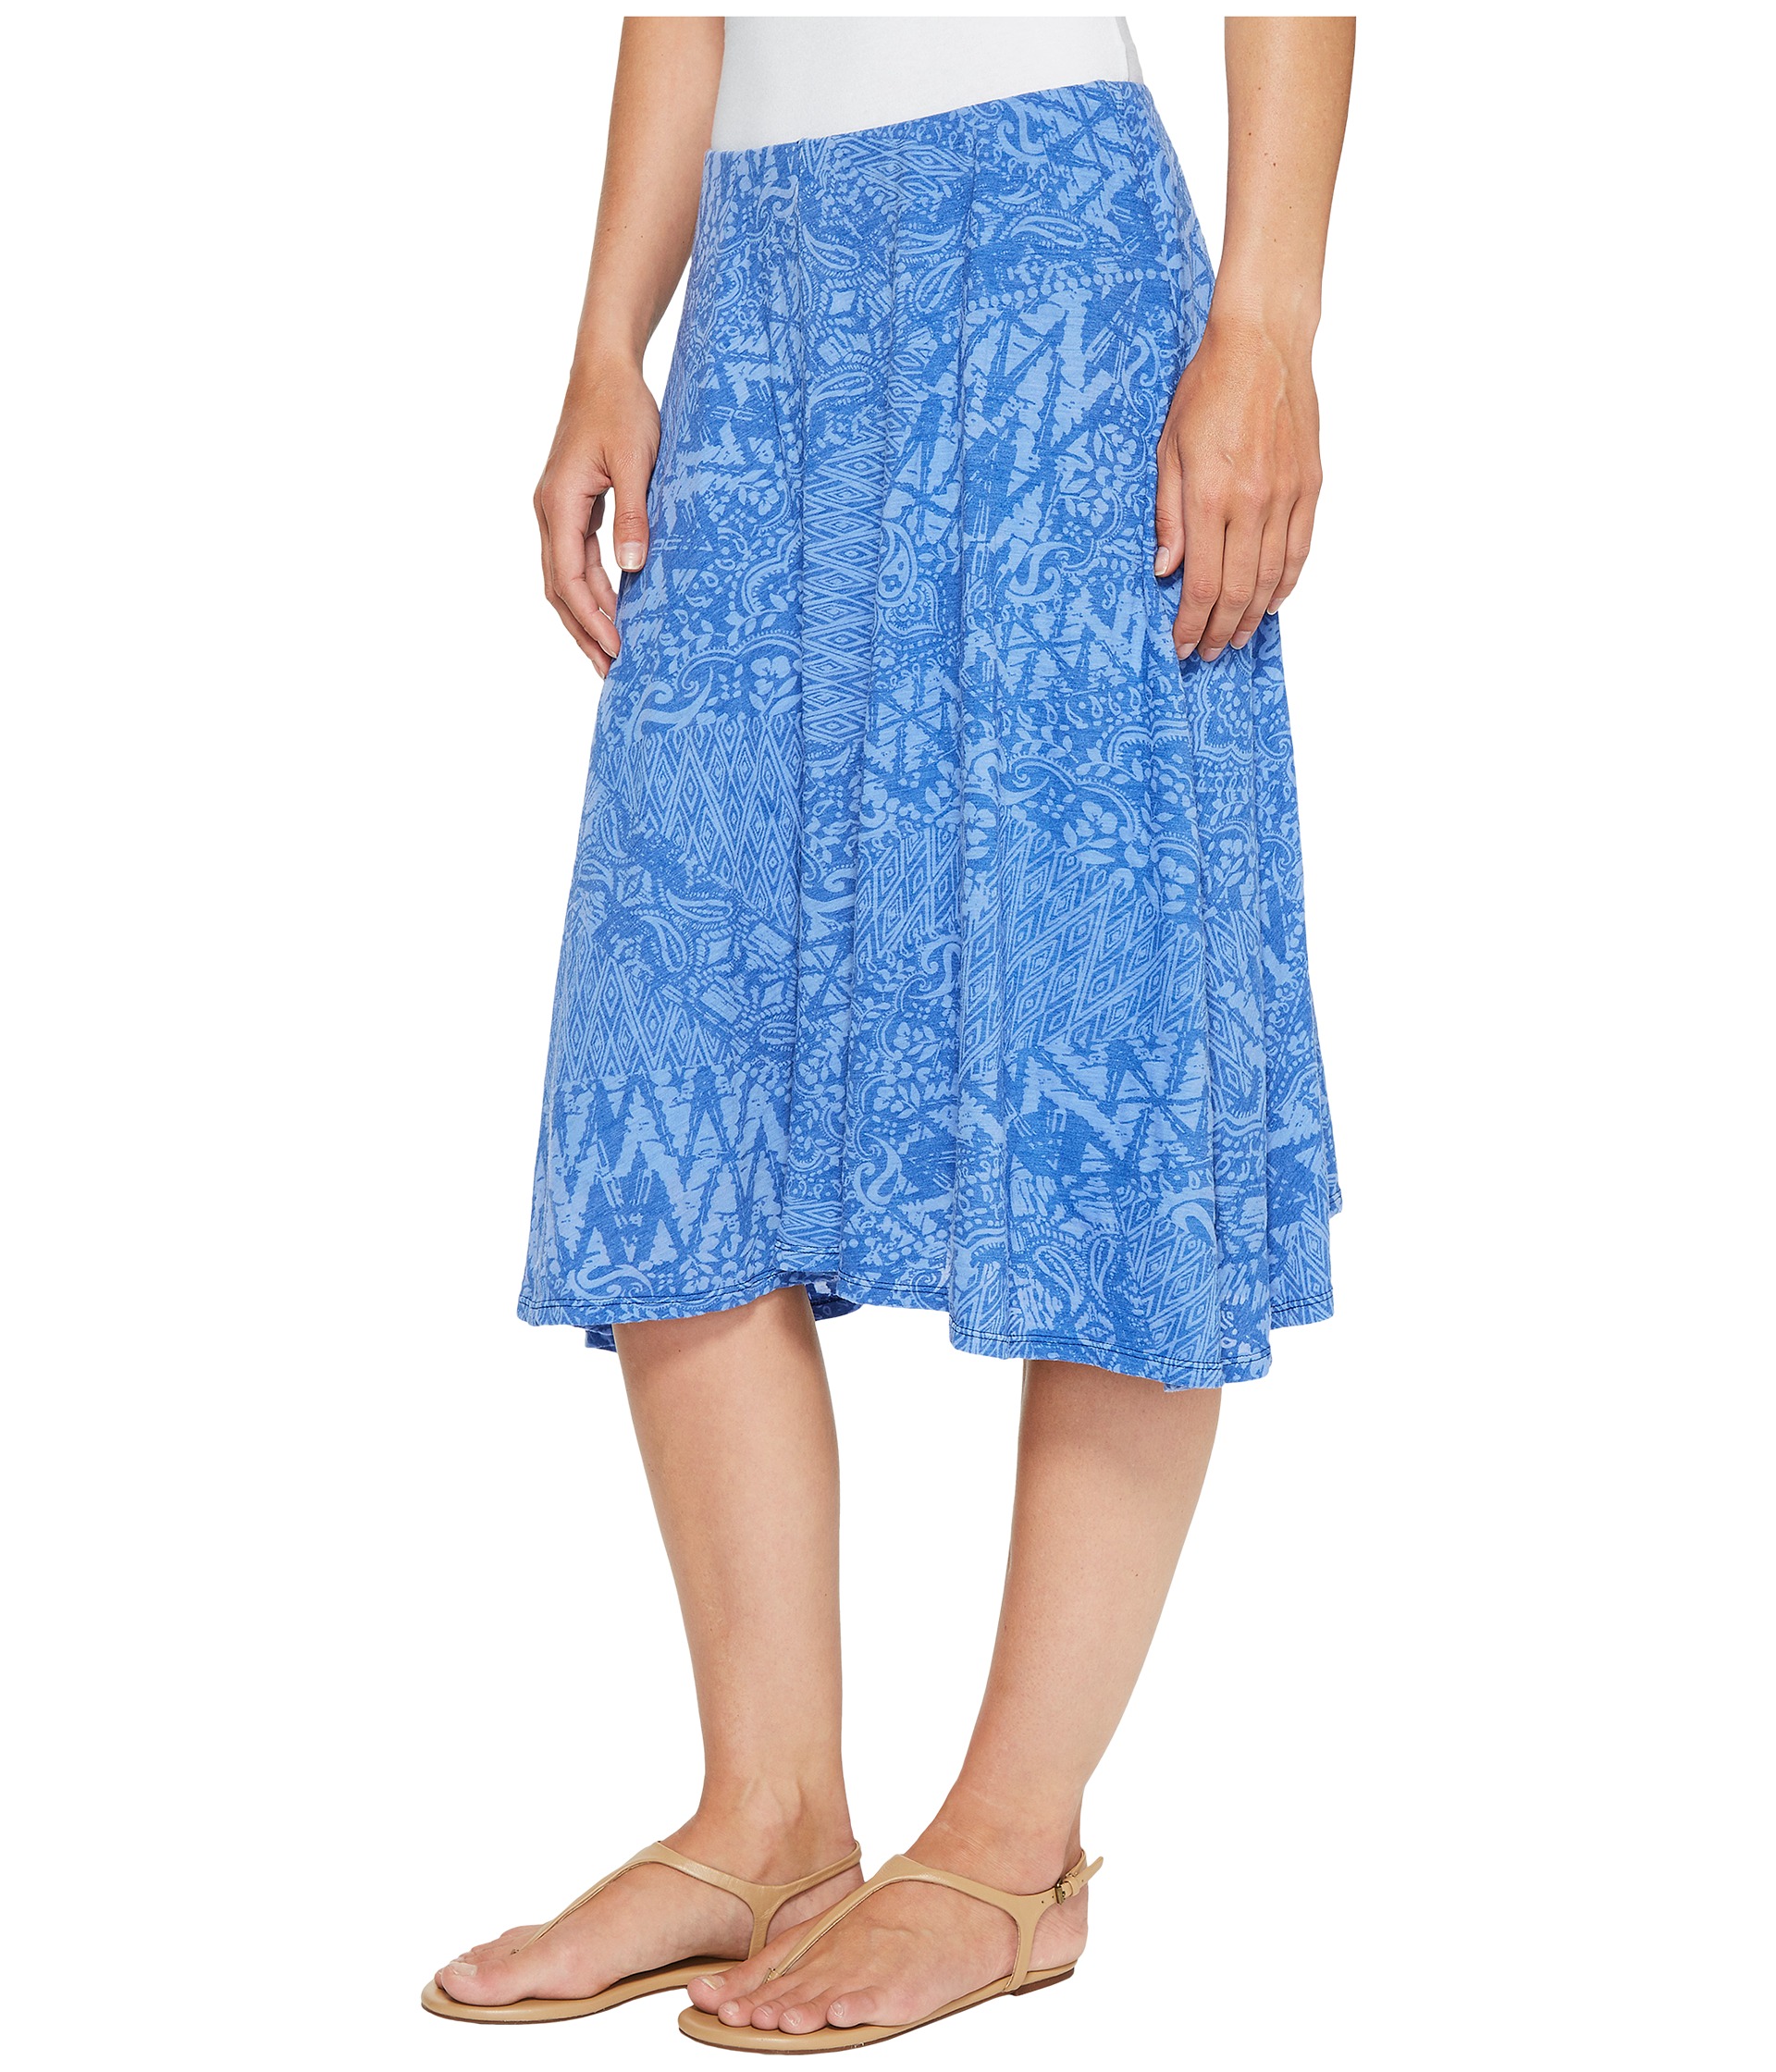 Mod-o-doc Patchwork Burnout Jersey Swing Skirt with Lining at Zappos.com